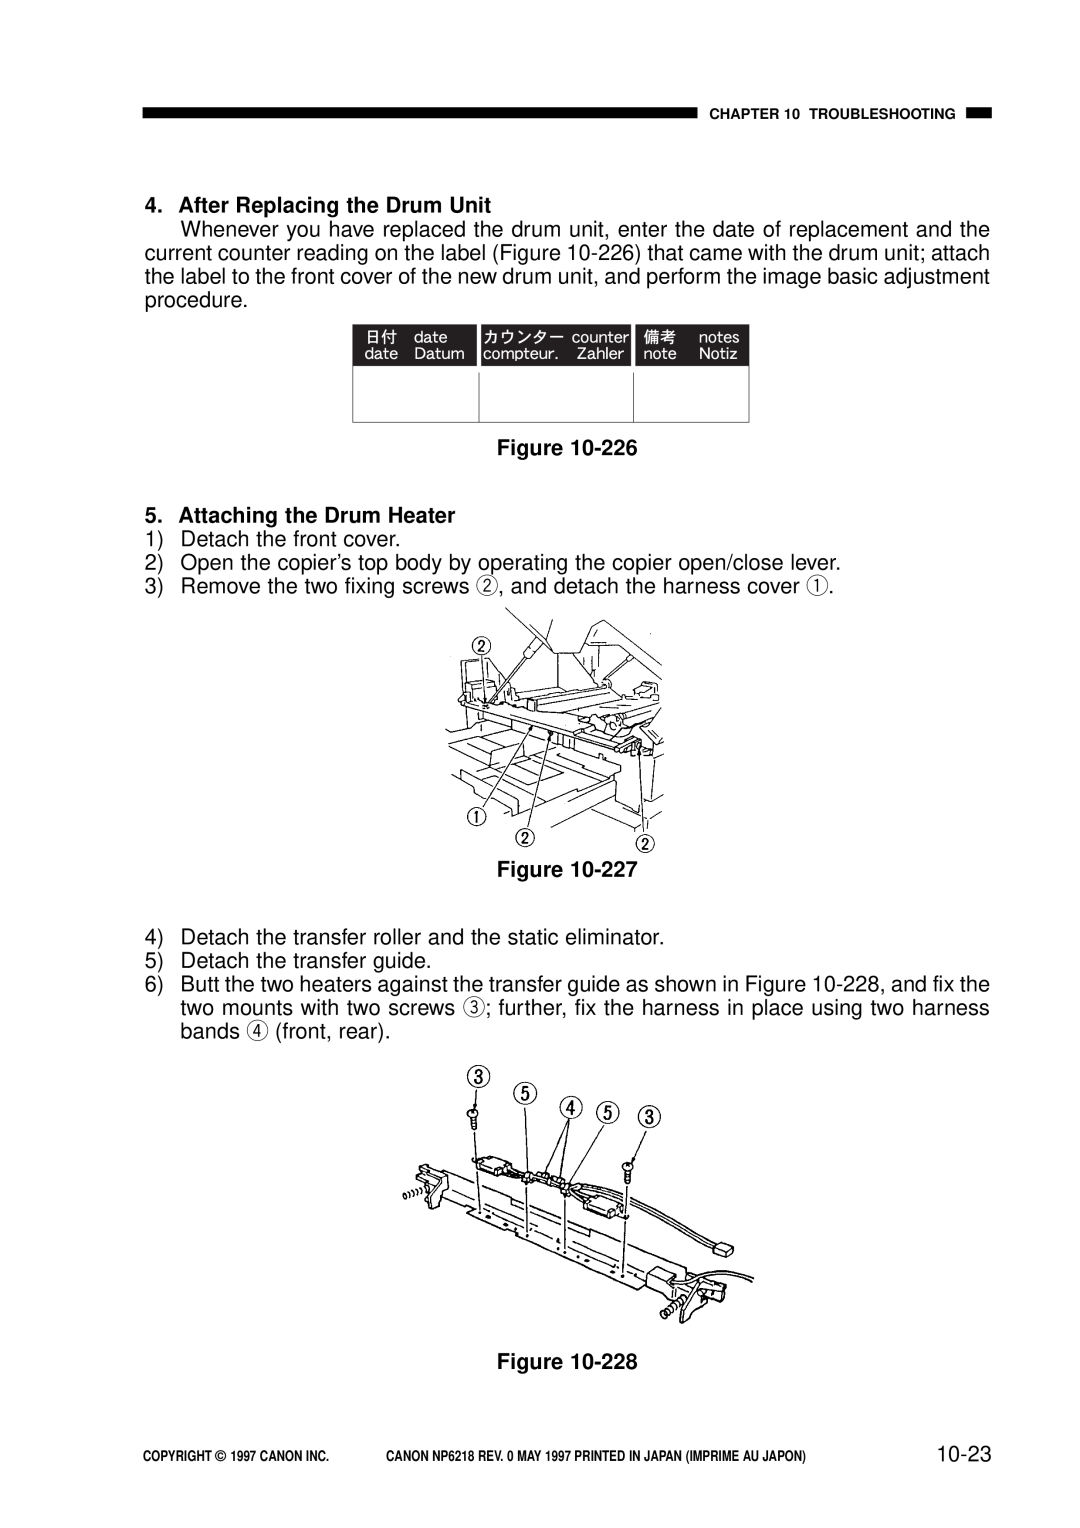 Canon FY8-13EX-000, NP6218 service manual After Replacing the Drum Unit, Attaching the Drum Heater, 10-23 